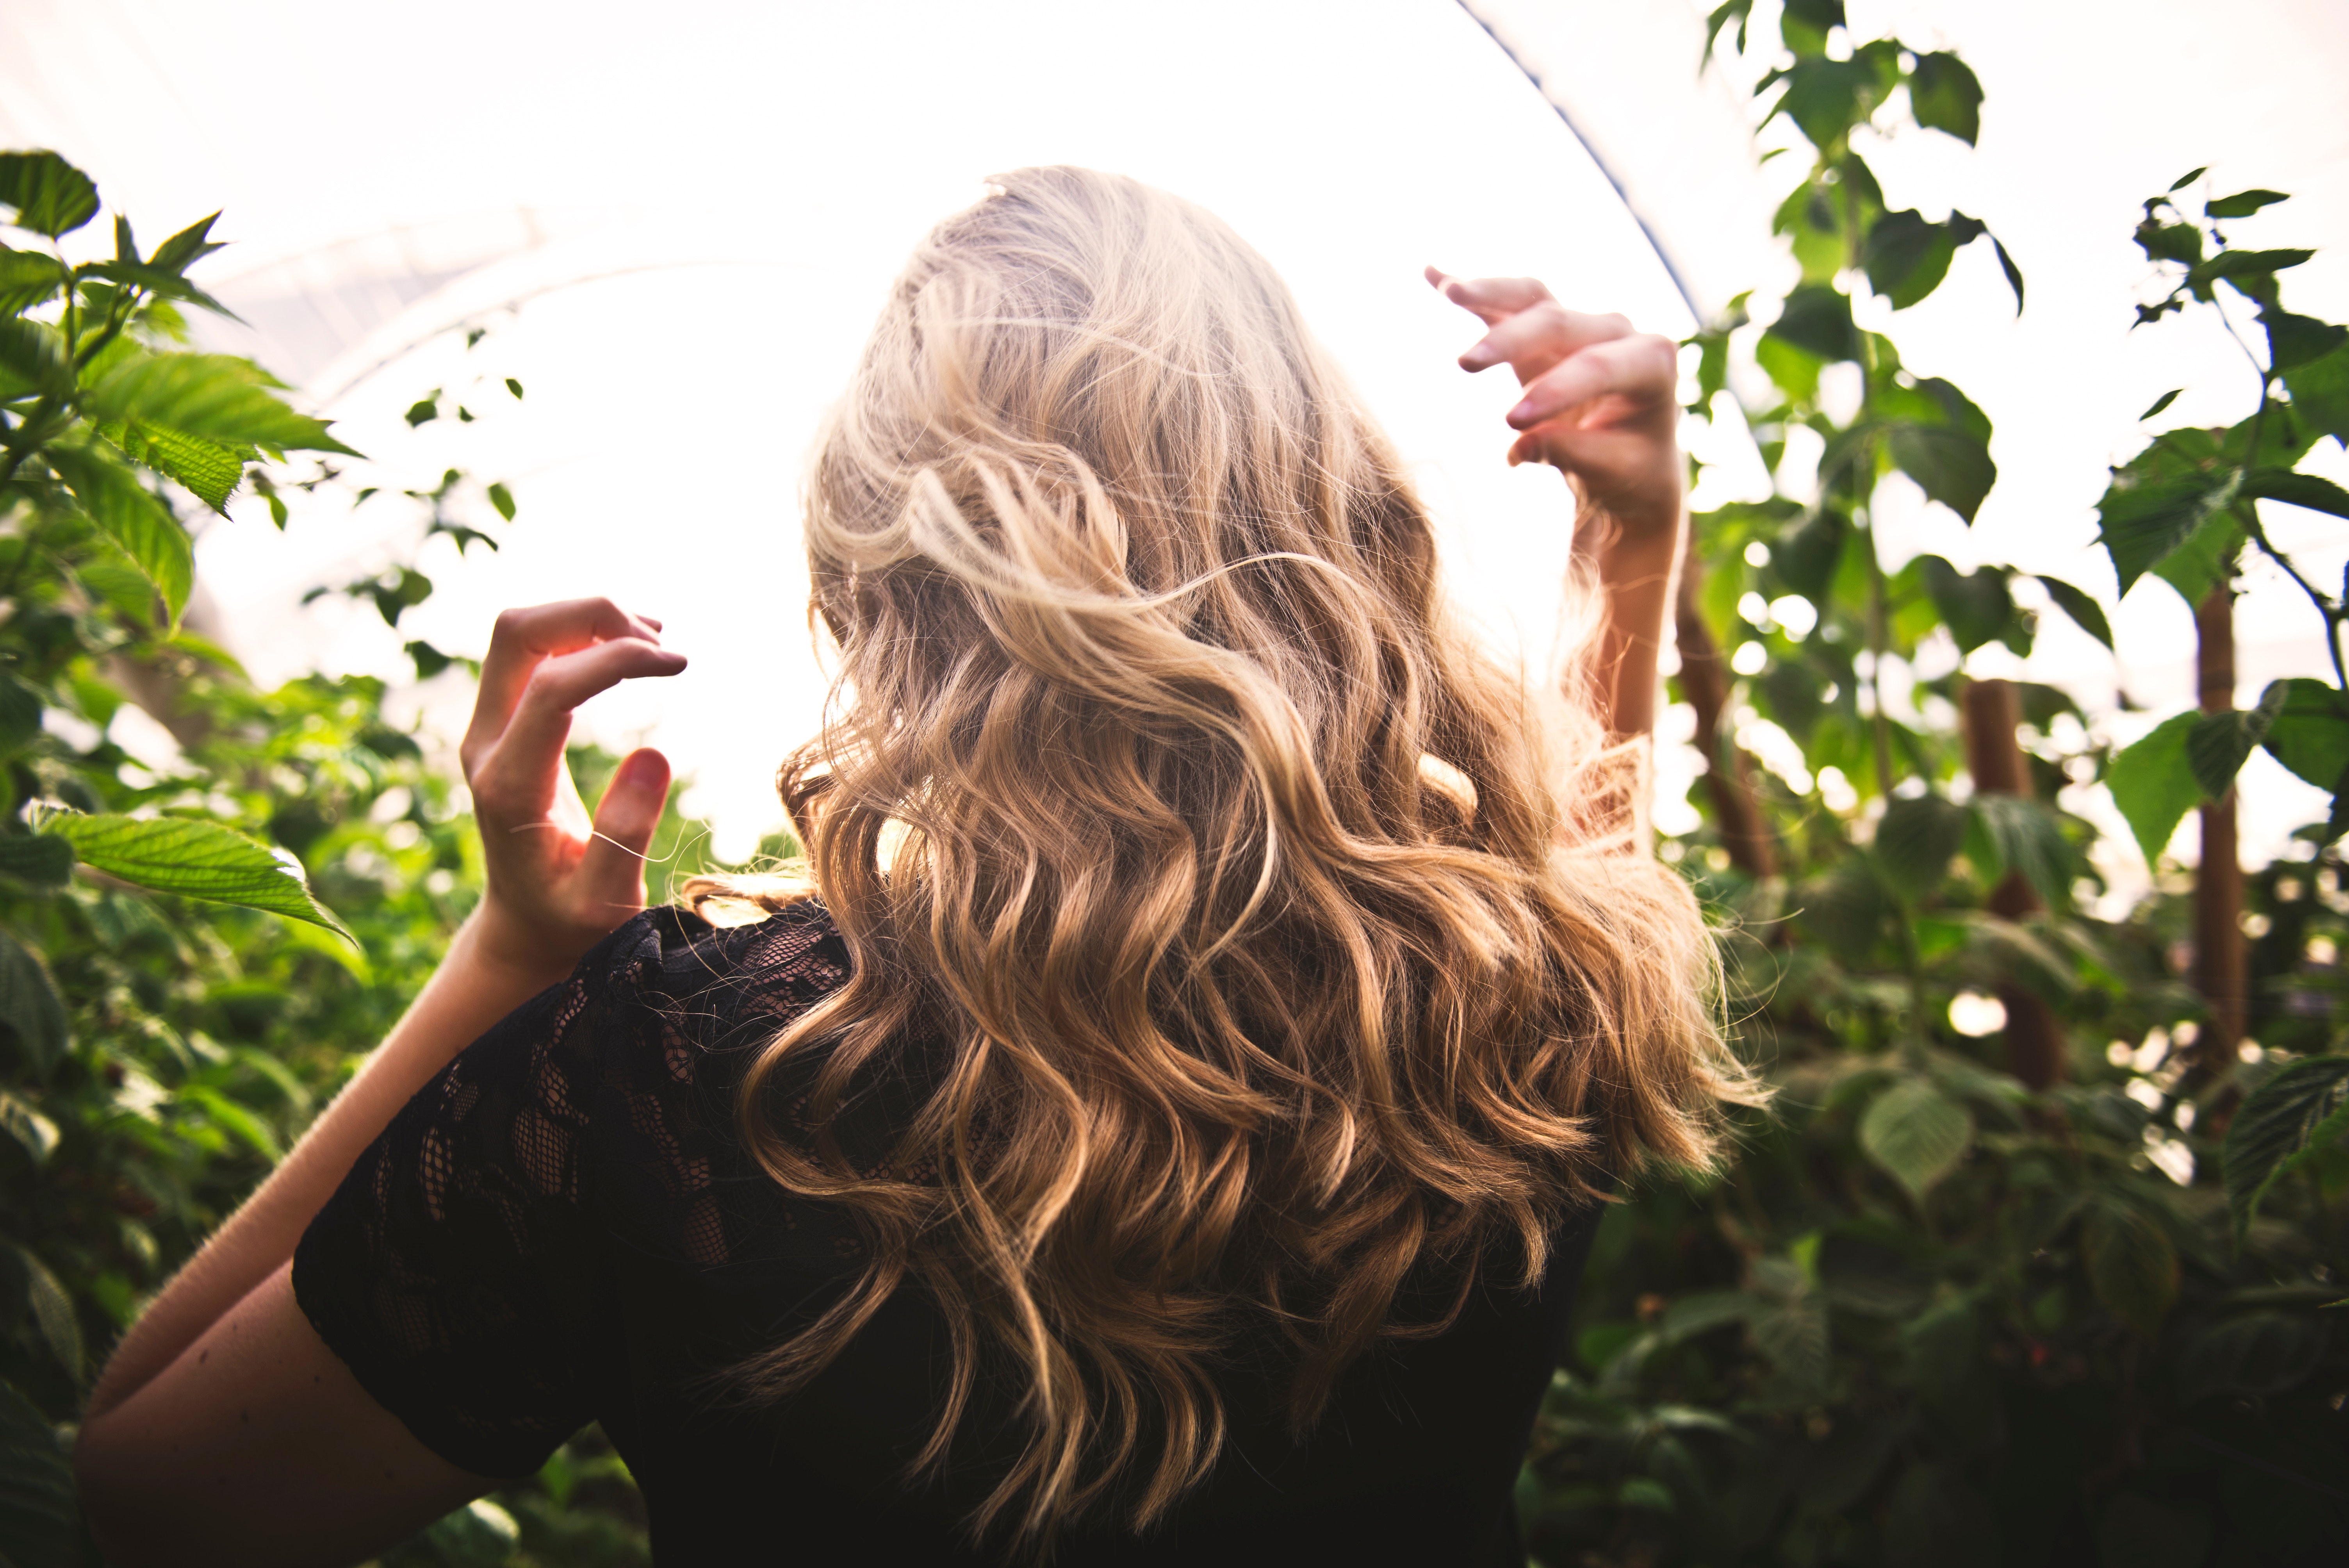 What's Important to Know About Hair Care